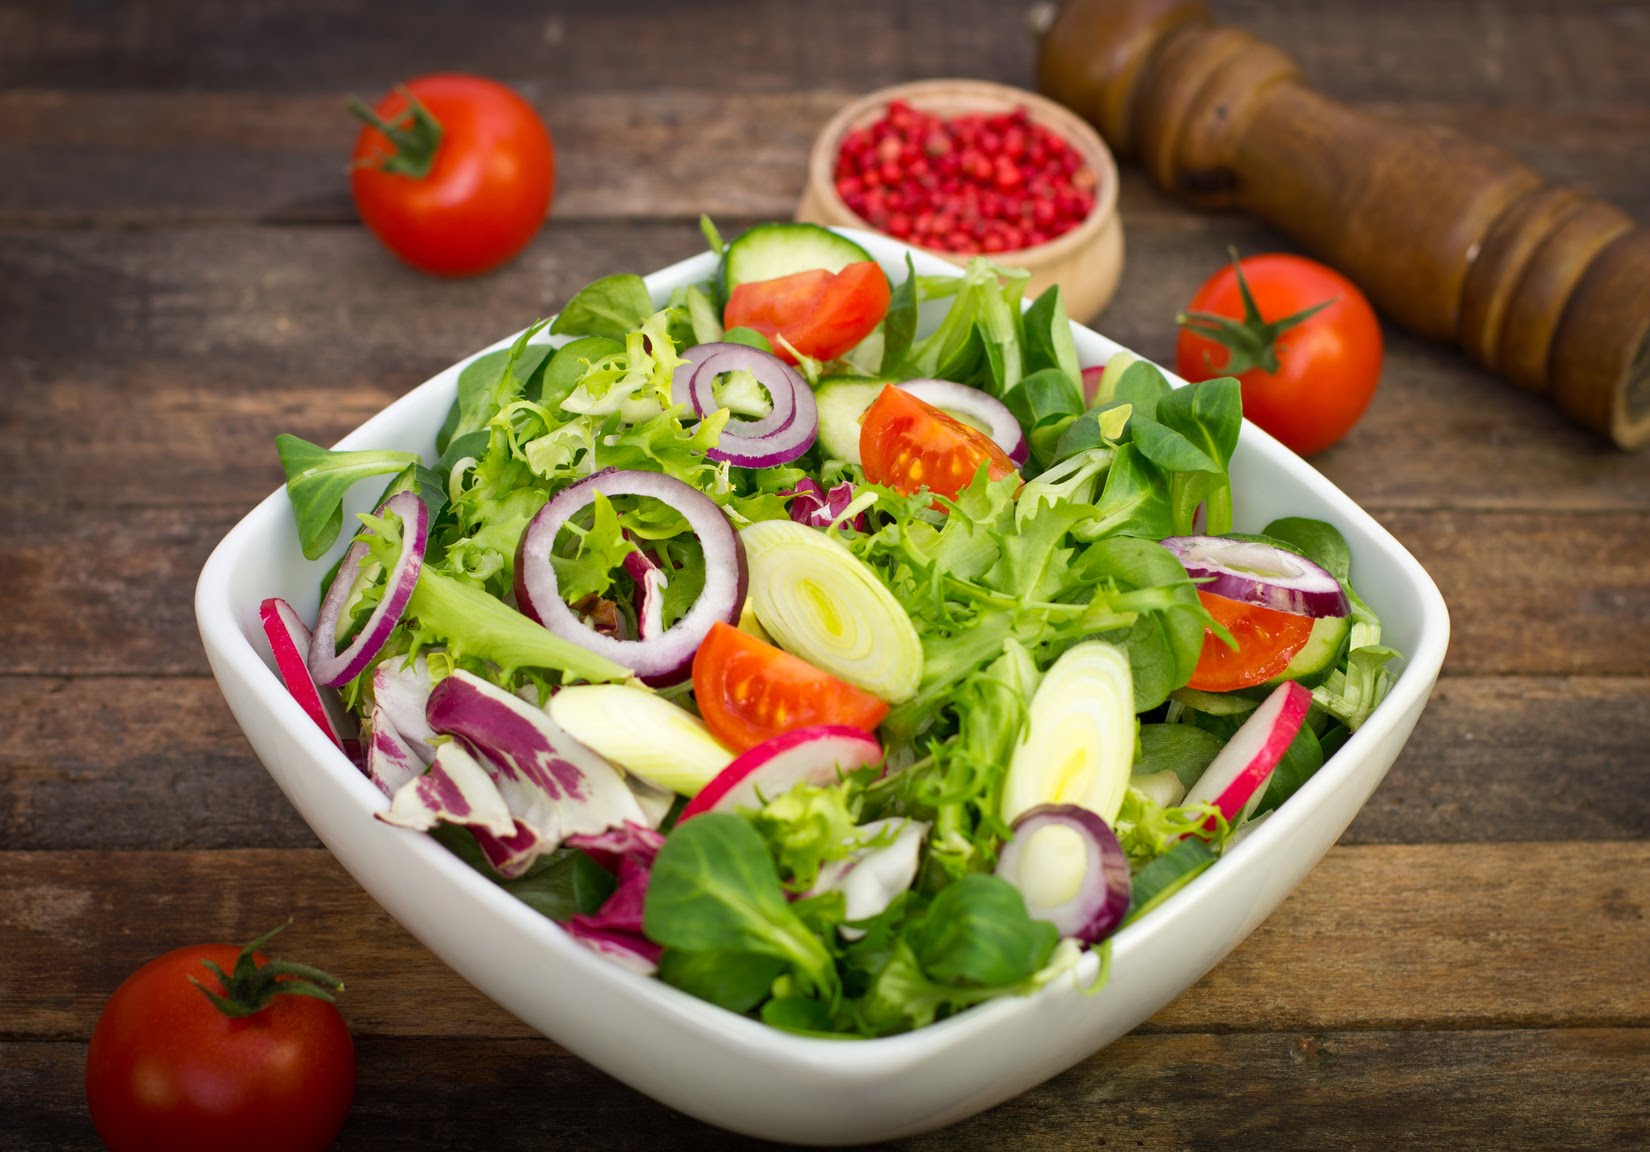 How To Make A Salad At Home: Good Food for a Good Life - Ejournalz